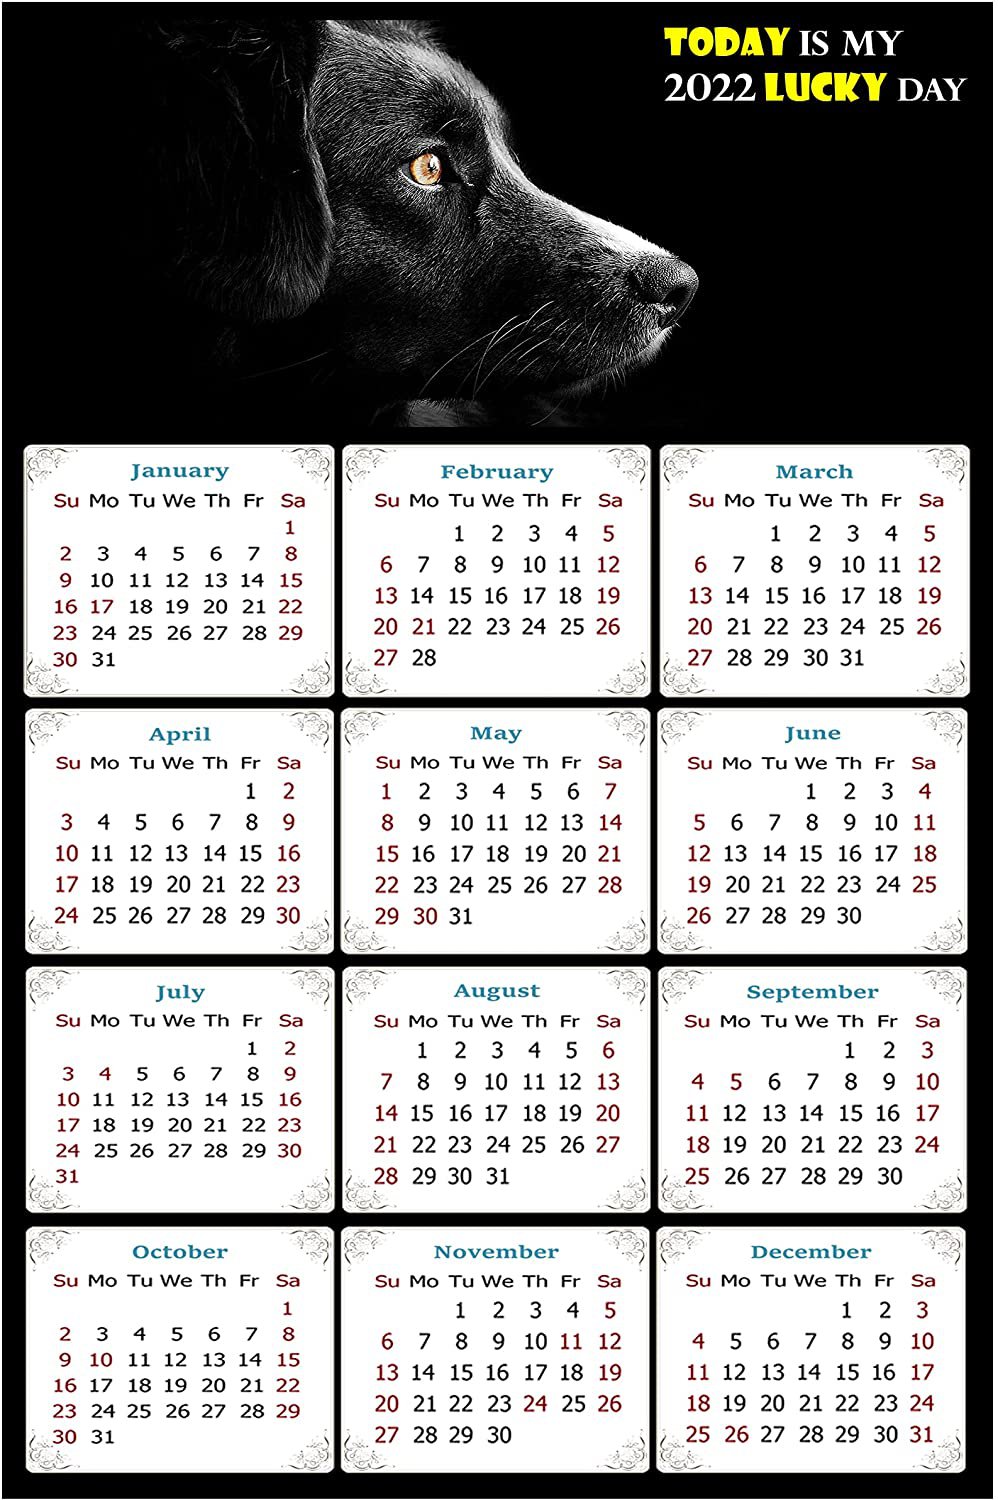 2022 Magnetic Calendar - Calendar Magnets - Today is My Lucky Day - Dogs Themed 05 (7 x 10.5)